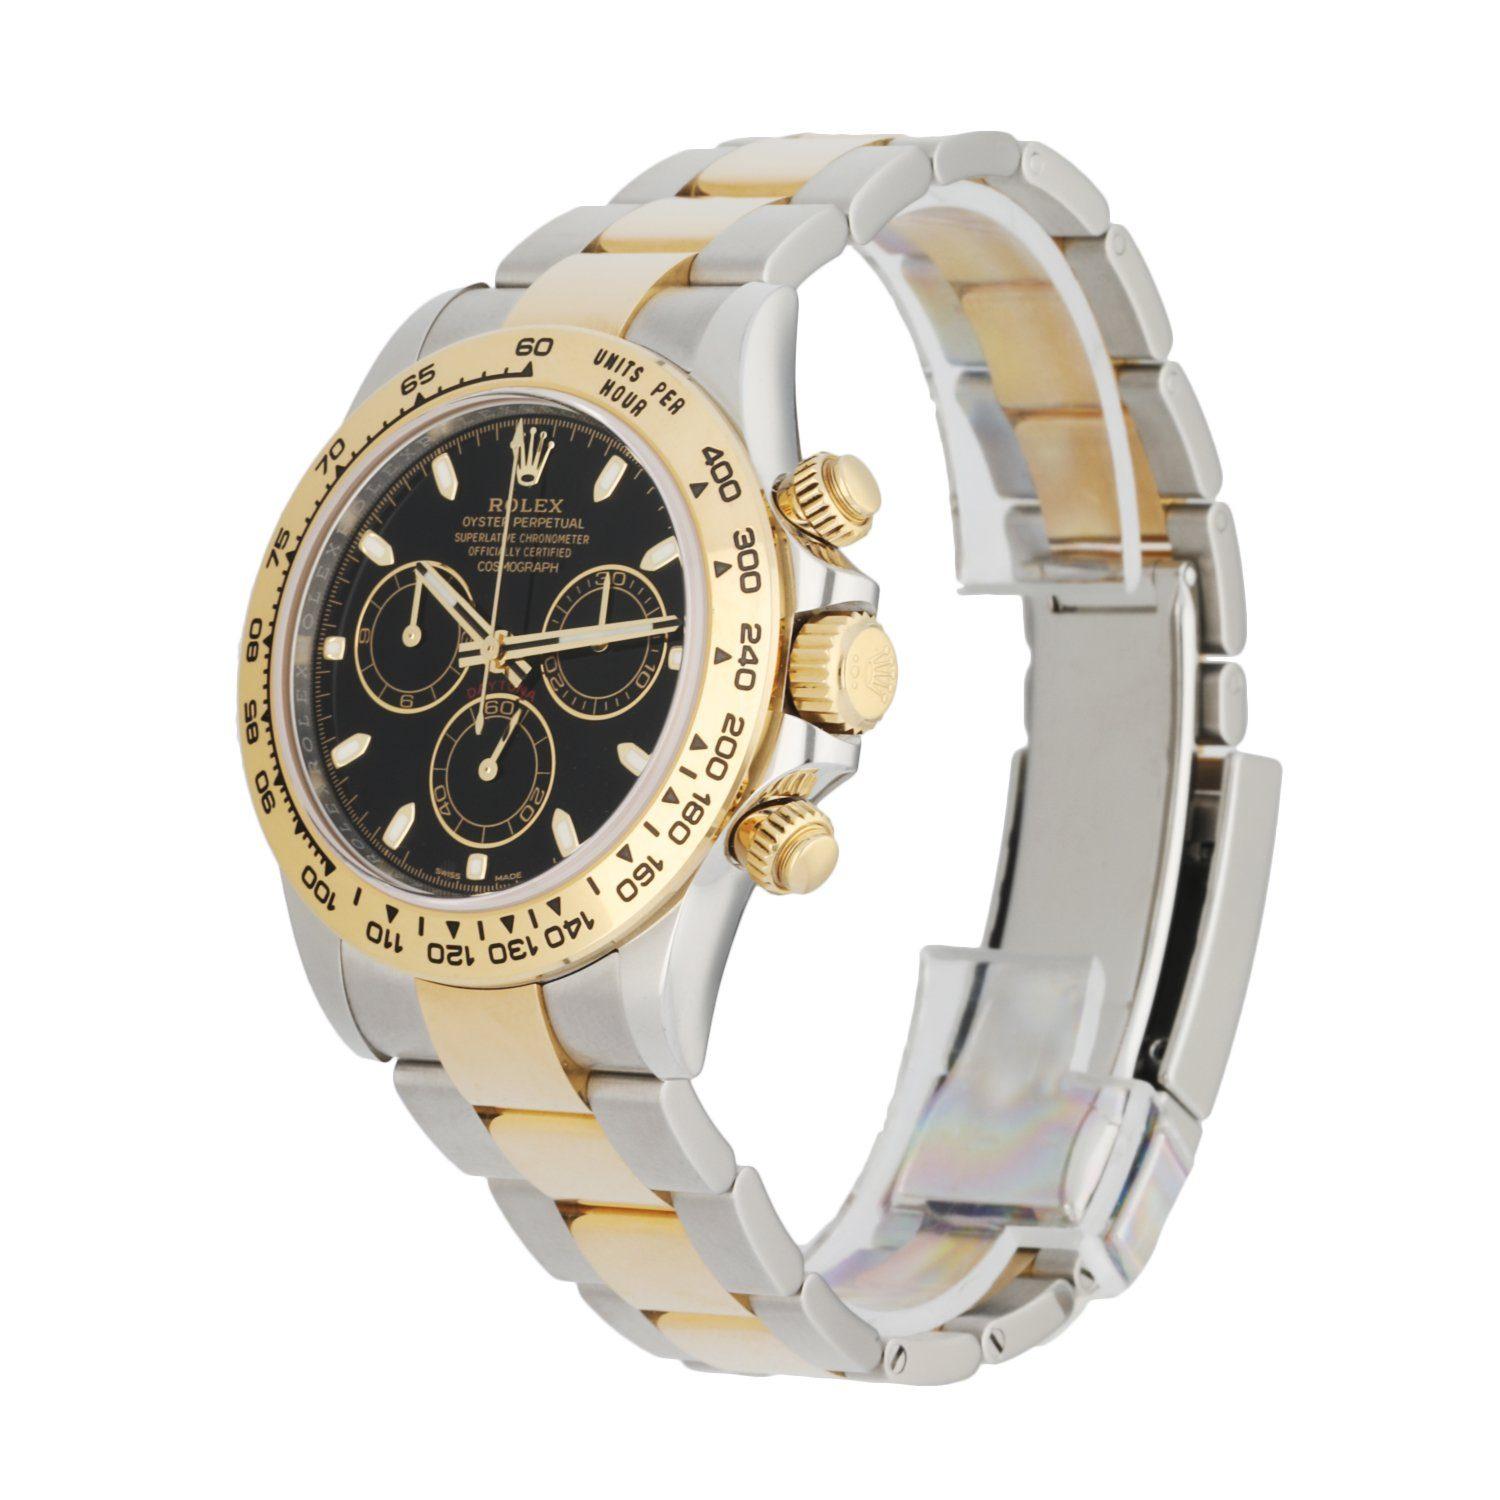 Rolex Daytona Cosmograph 116503 men's watch.Â 40mm stainless steel case with 18k yellow gold bezel with black bezel insert.Â Black racing dial with luminous gold hands andÂ luminous index hour marker. Three sub-dials displaying 30-minute, 12-hours,